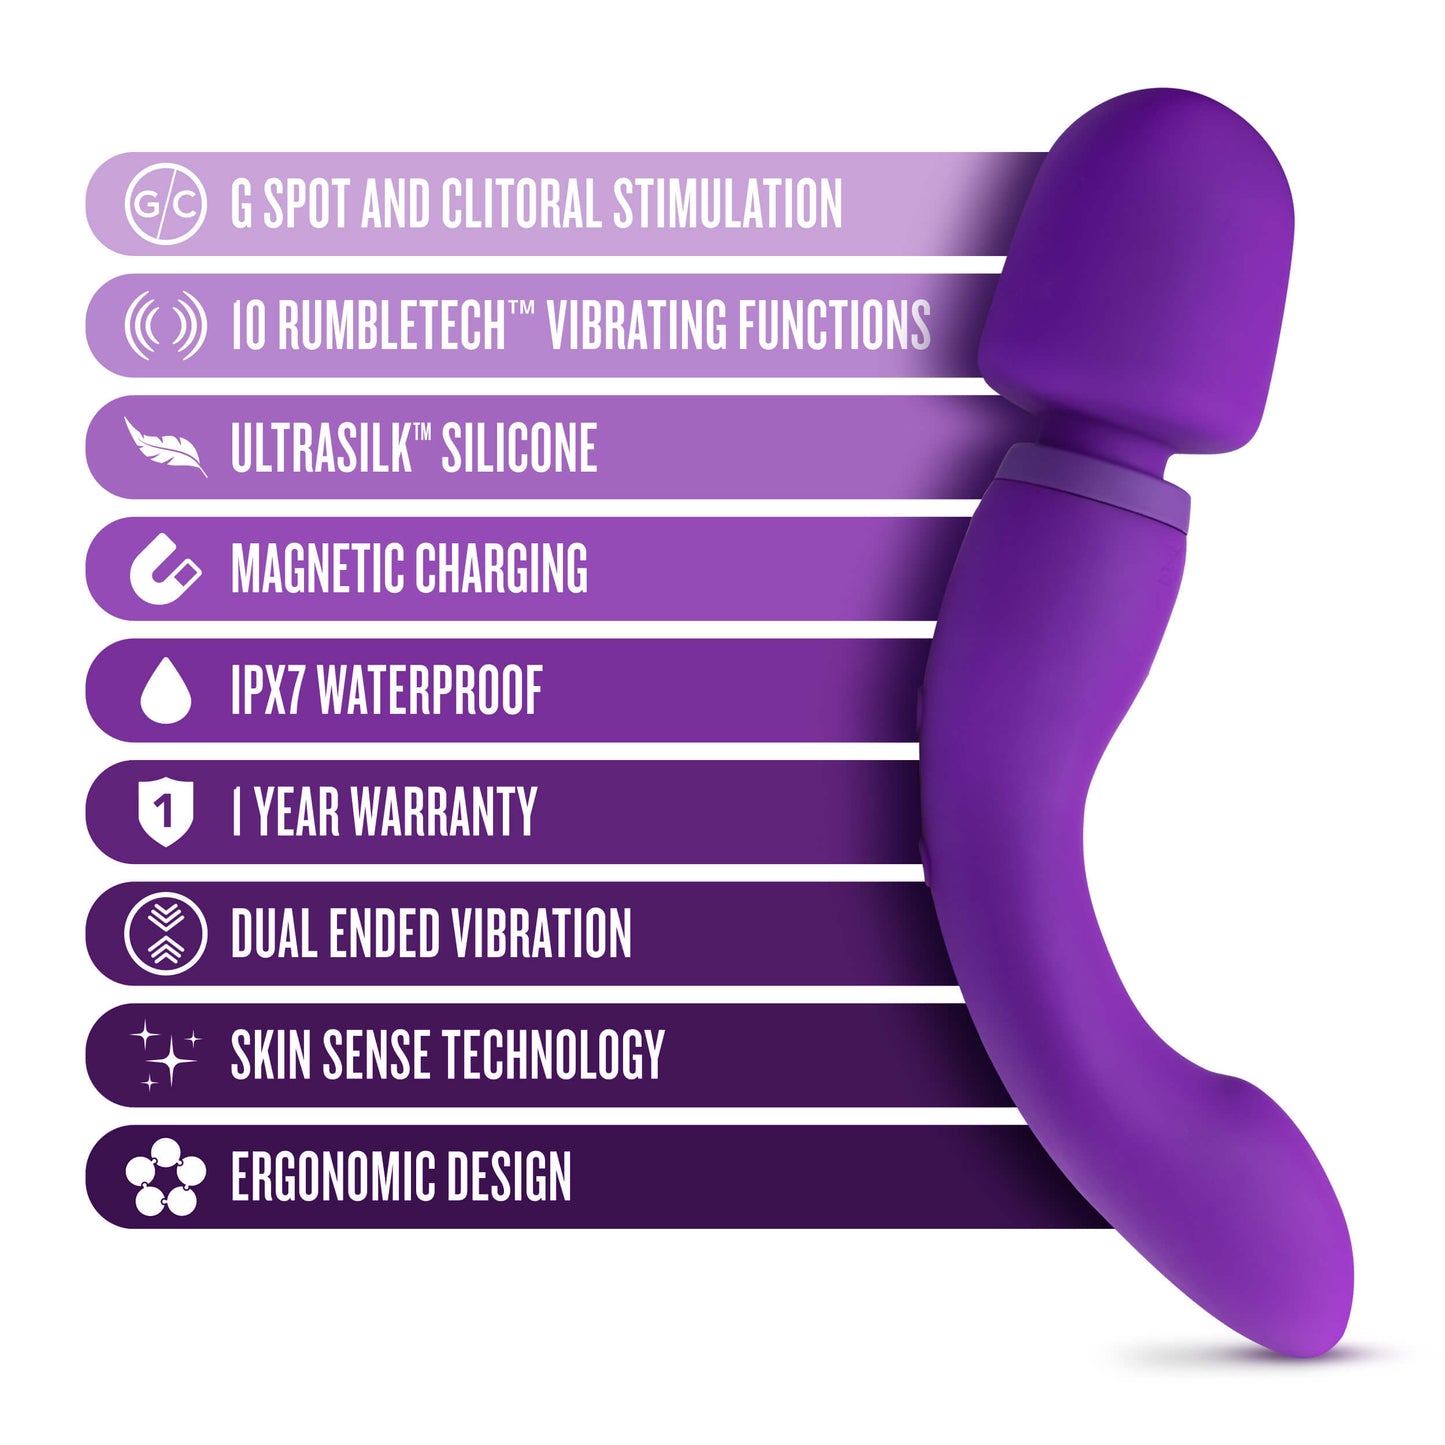 Blush Wellness Dual Sense Double Ended Ergonomic Wand features - by The Bigger O online sex toy shop. USA, Canada and UK shipping available.